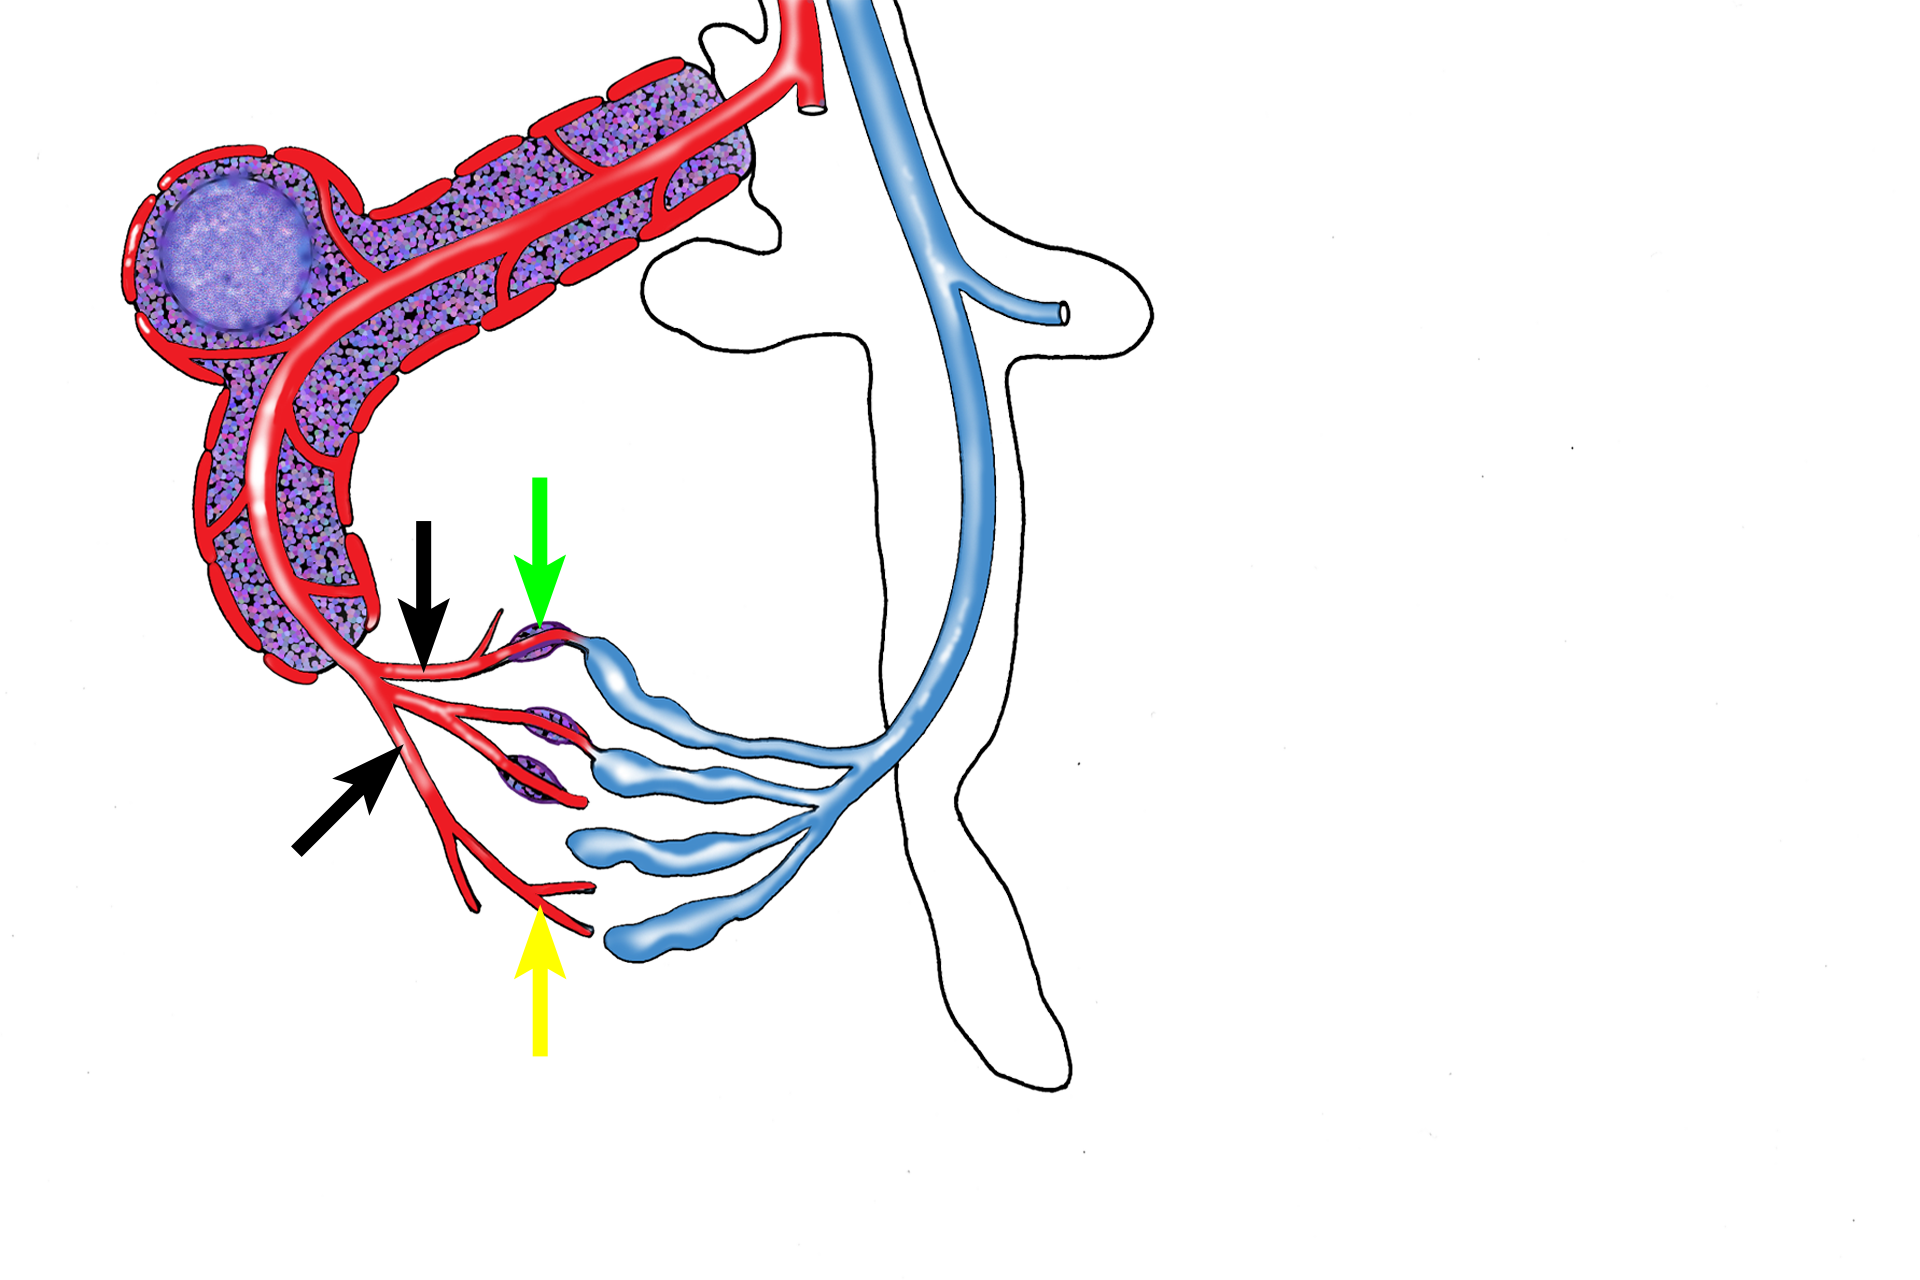 Red pulp vasculature > <p>When the central arteriole leaves the white pulp to enter the red pulp, it divides into a series of smaller arterioles, called penicillar arteries (black arrows), which continue as sheathed (green arrows) and unsheathed (yellow arrows) capillaries.</p>
